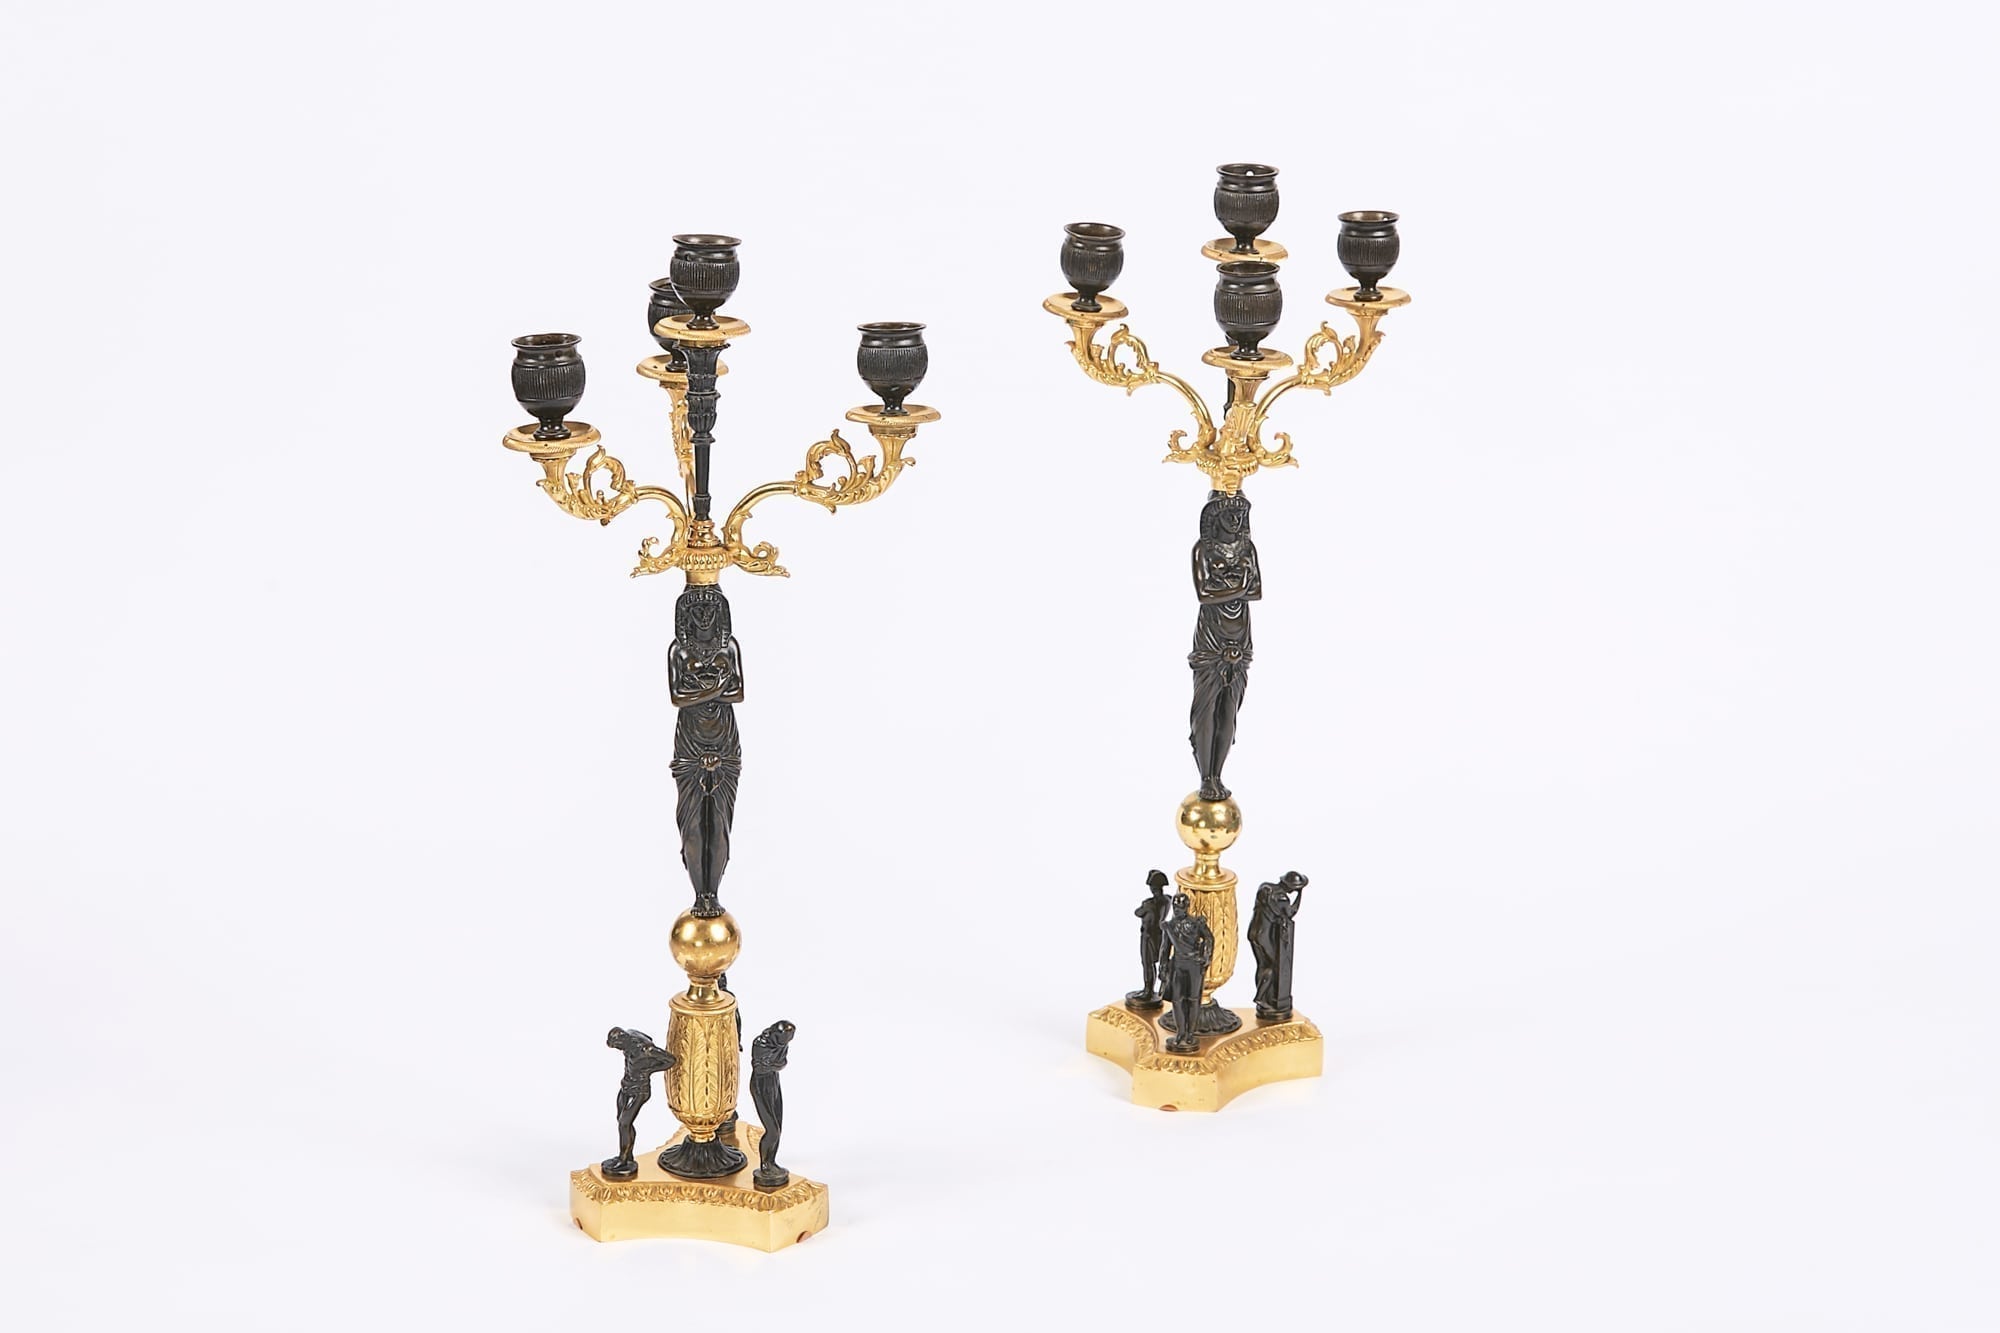 A Pair of French Empire Gilt Bronze Candle Sticks